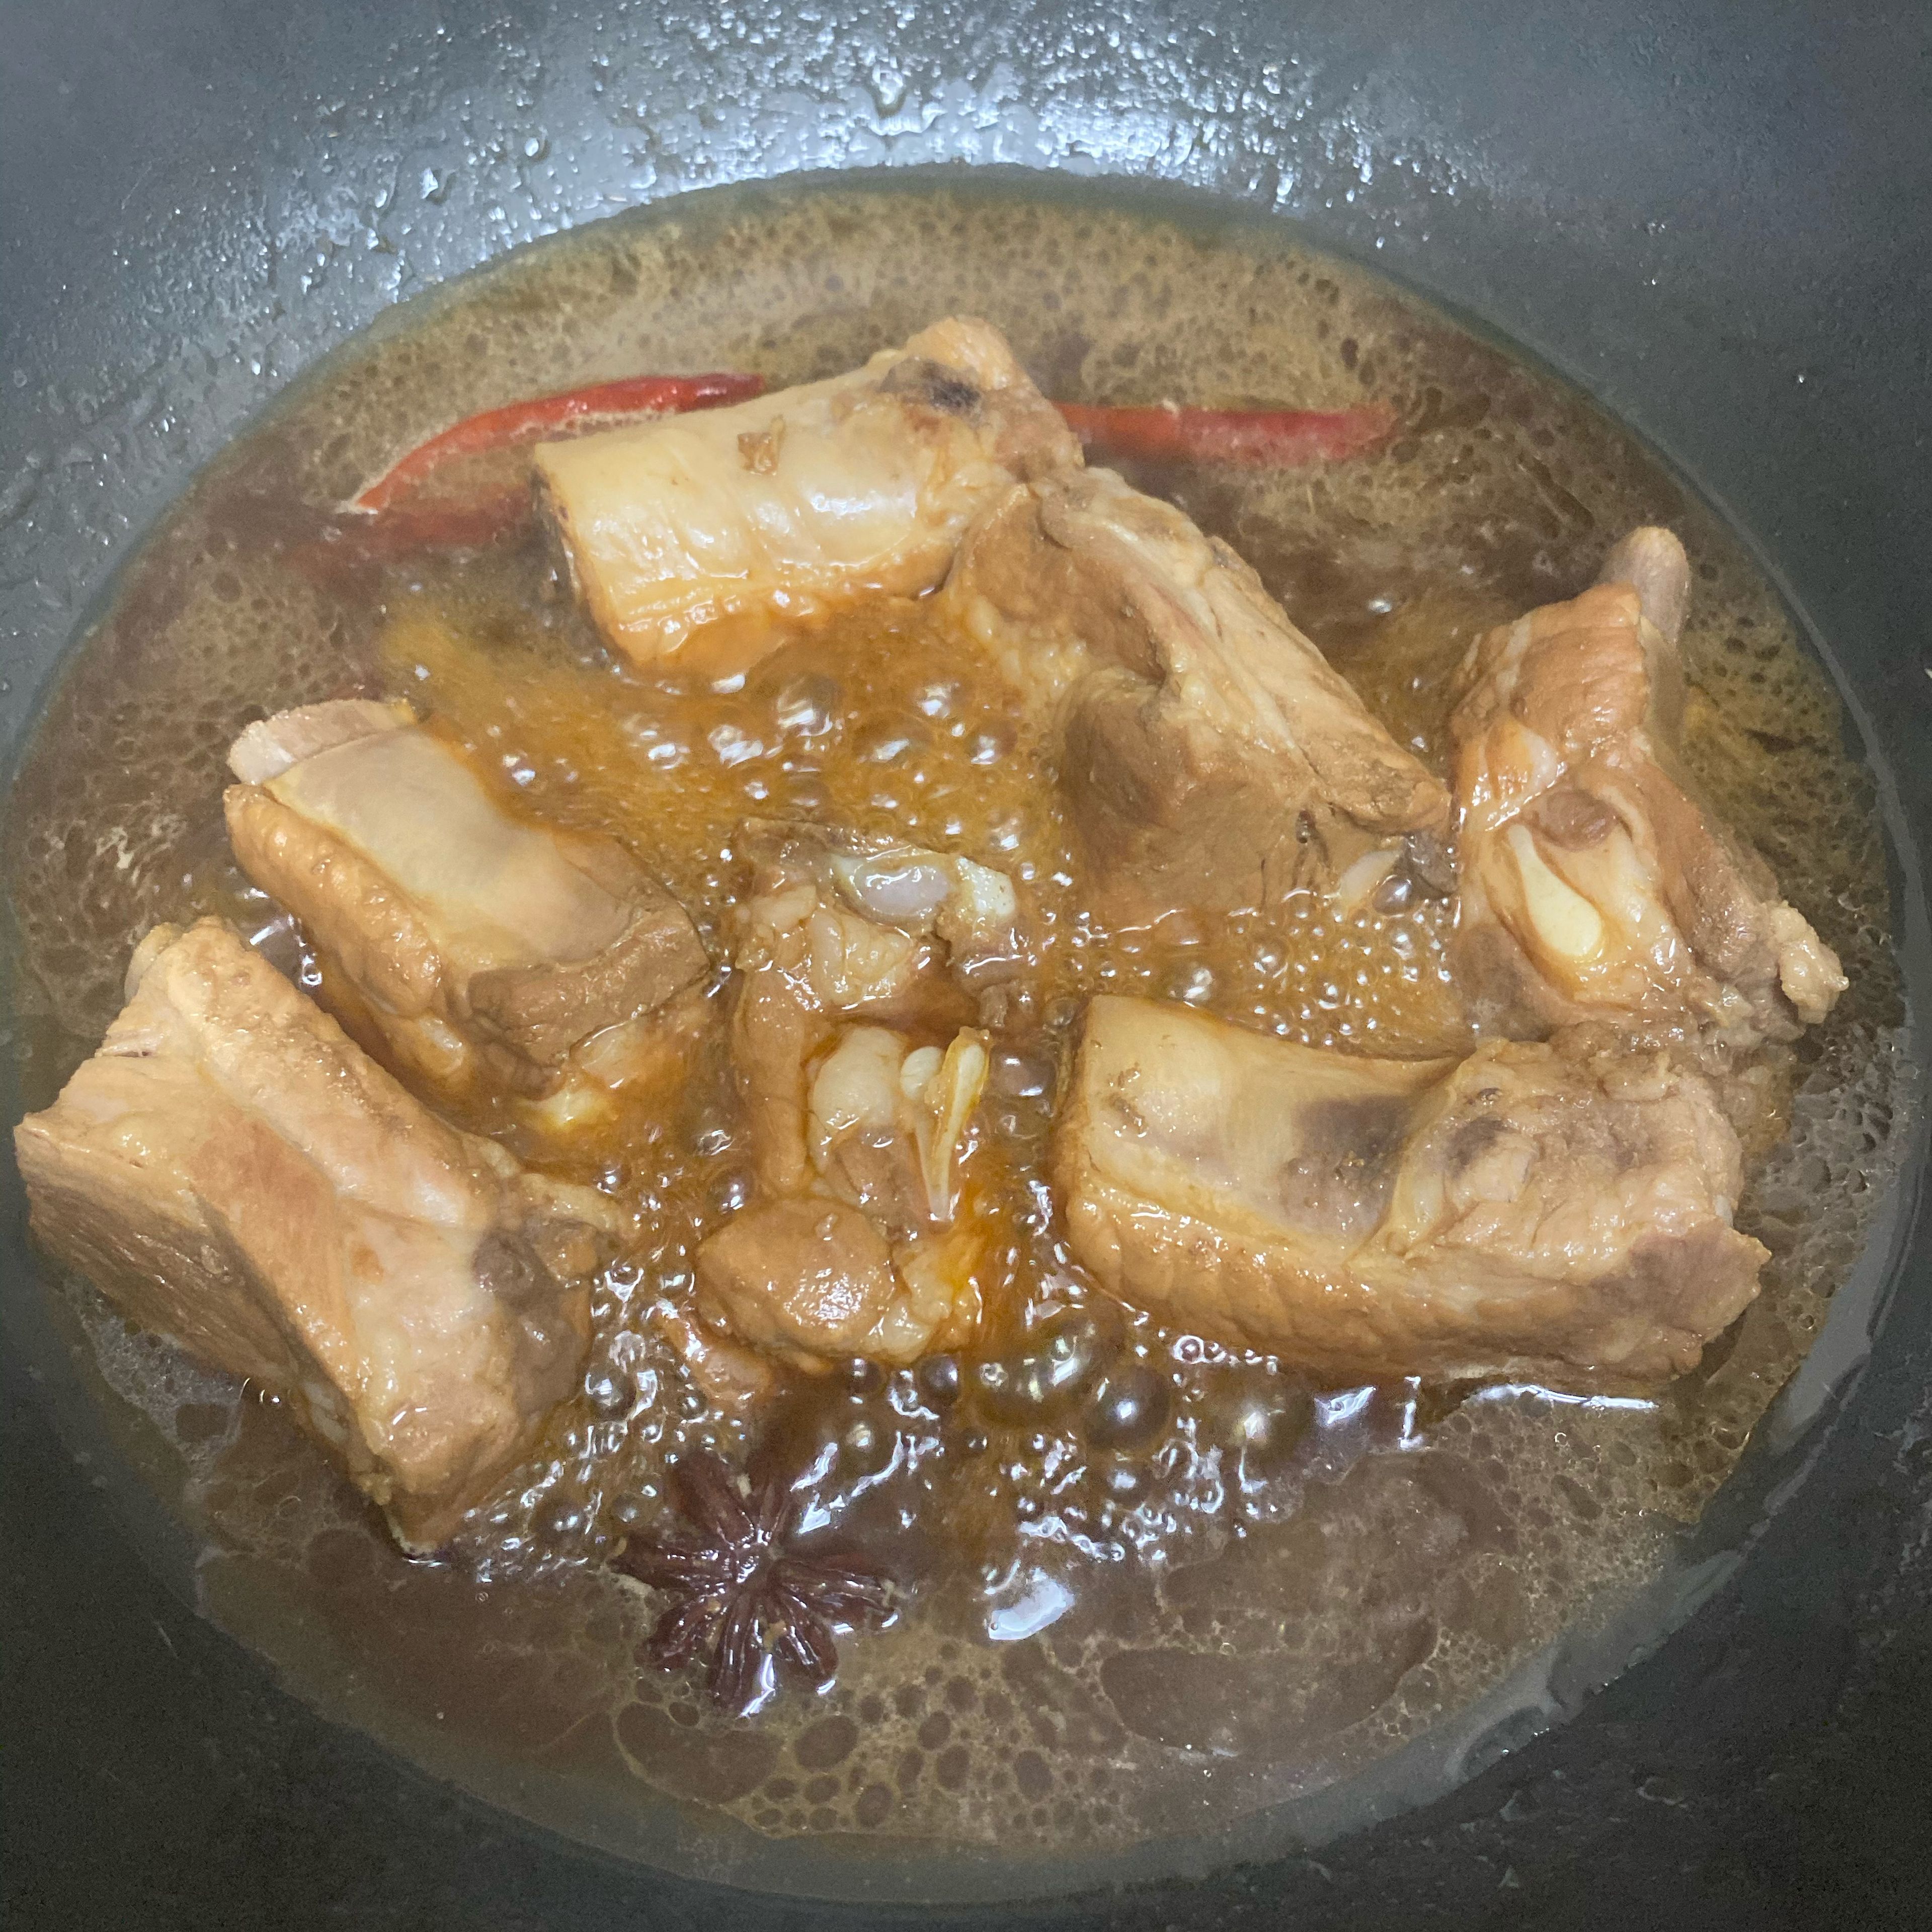 Remove the lid and turn the heat back to high. Carefully watch the water because it evaporates quite fast. Stir the ribs if needed in case they get sticky to the pot/wok. The ribs are done when there’s only a little broth left and it should be a bit sticky. Their color is also much darker.